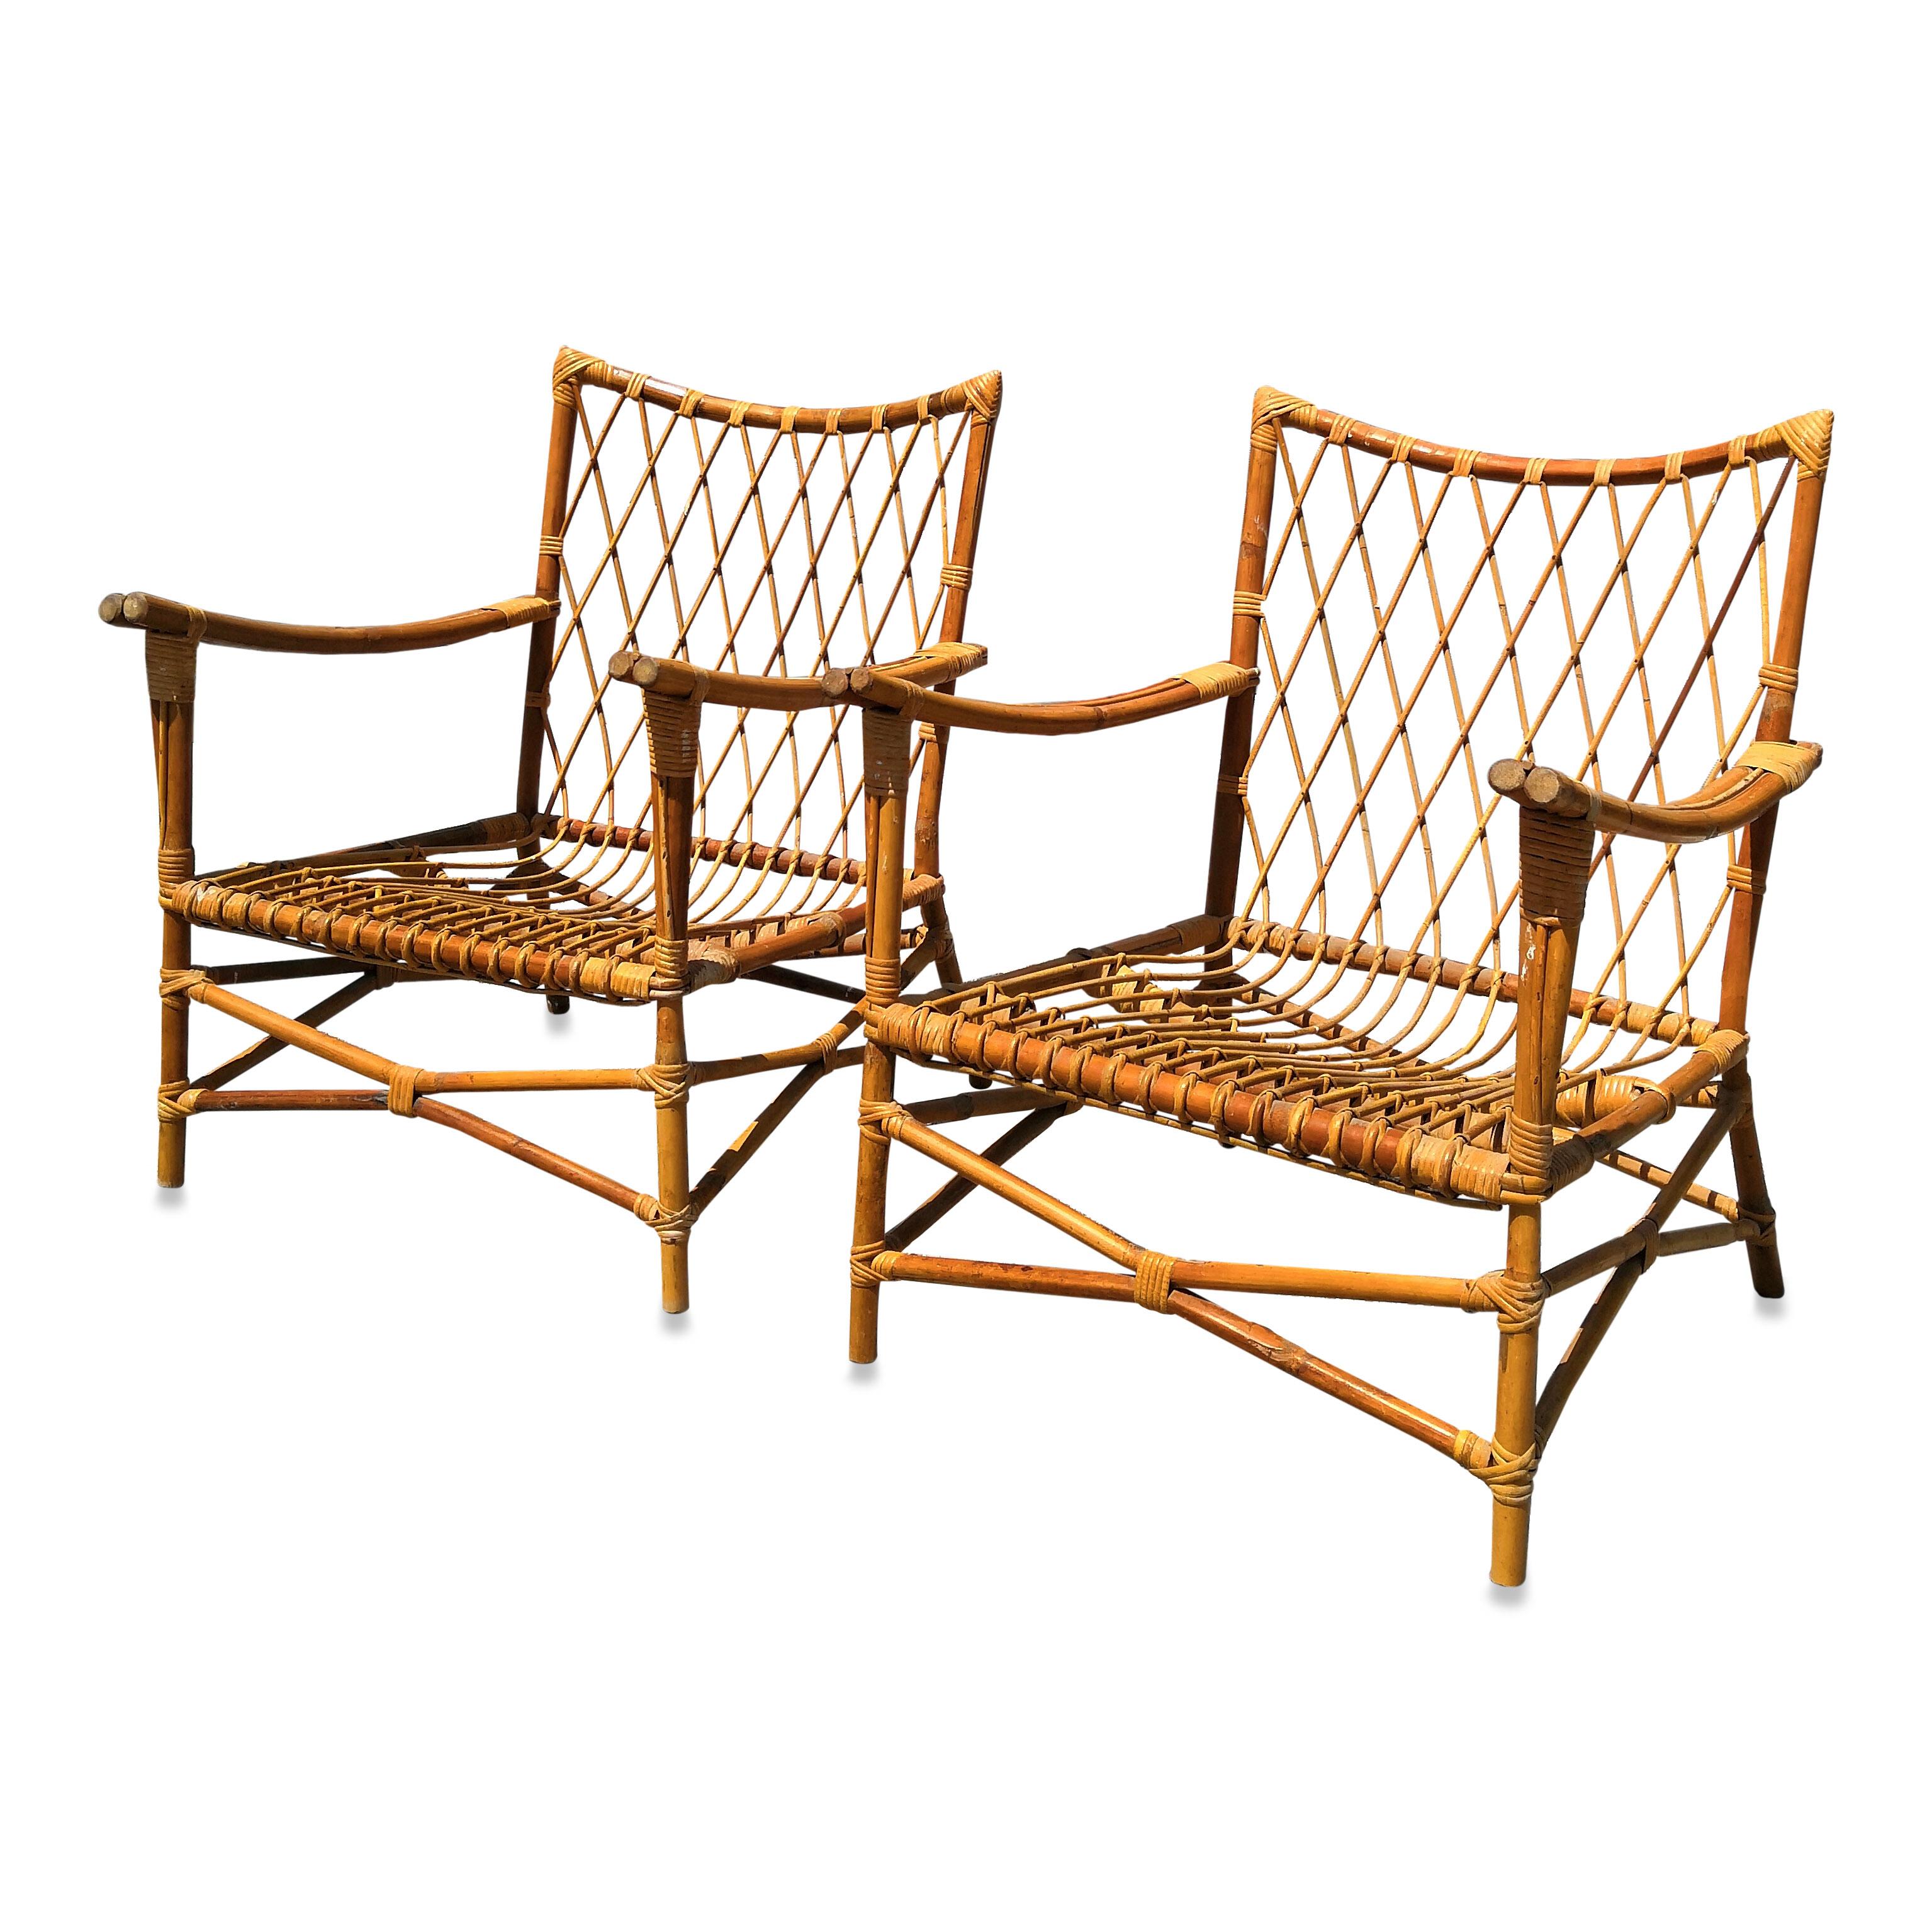 Mid-20th Century Pair of Bamboo and Rattan Armchairs, France, 1960s